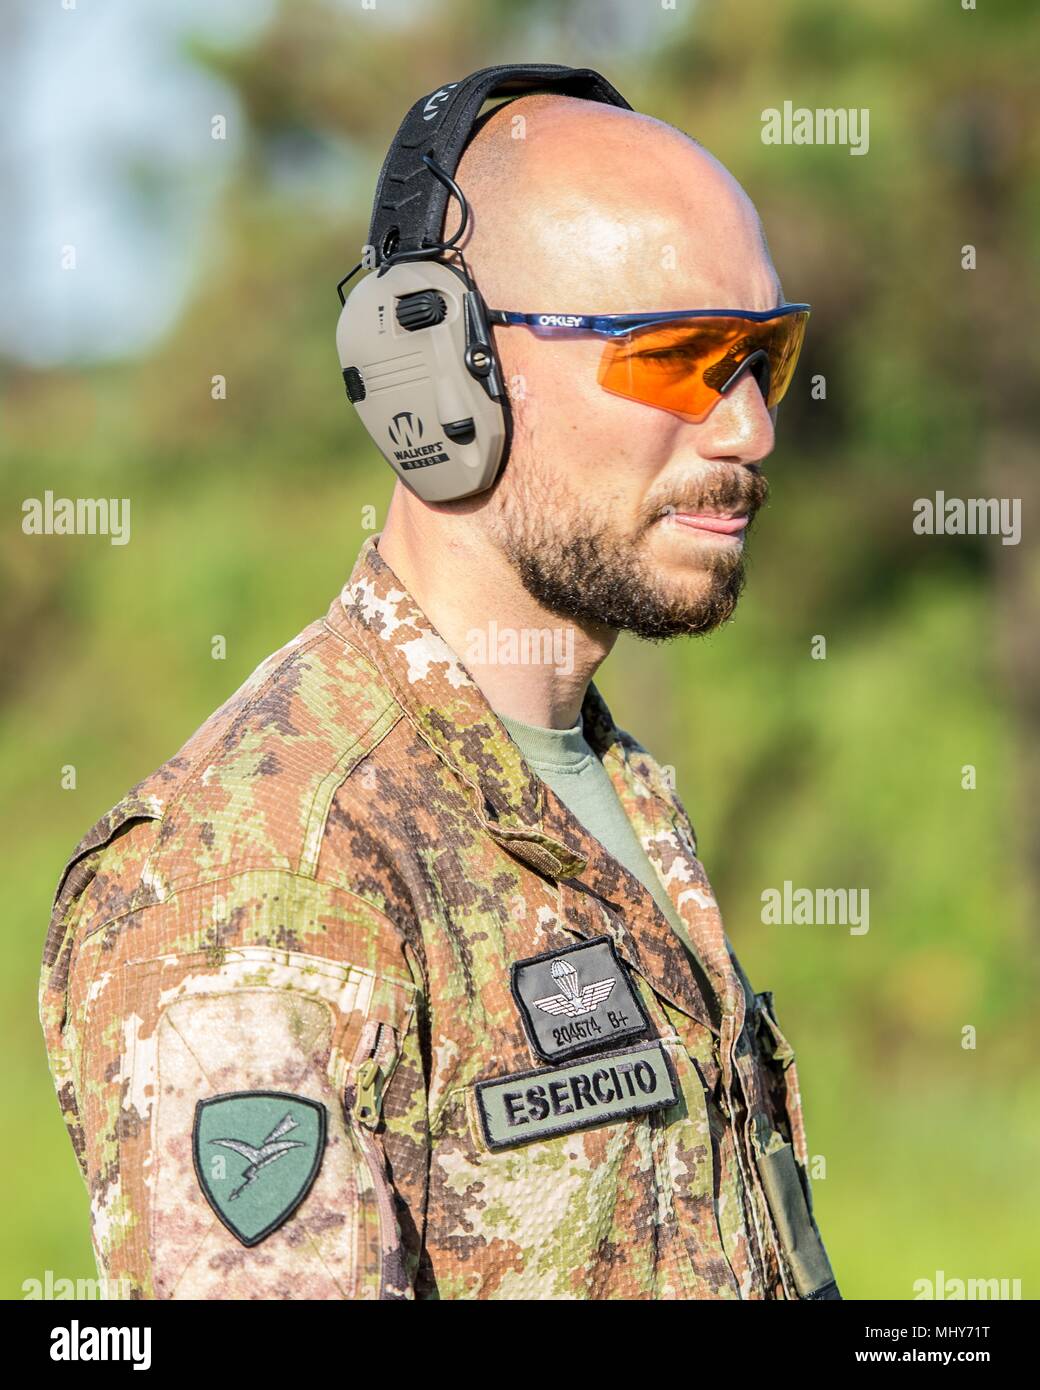 Italian Army Soldier on range at the 47th Winston P. Wilson (WPW) and 27th Armed Forces Skill at Arms Meet (AFSAM) at Robinson Maneuver Training Center, Ark, 2018, April 30, 2018. The Italian competitors were not able to bring over their Beretta ARX 160 rifles and had to learn how to use a new rifle platform for the competition. () Stock Photo